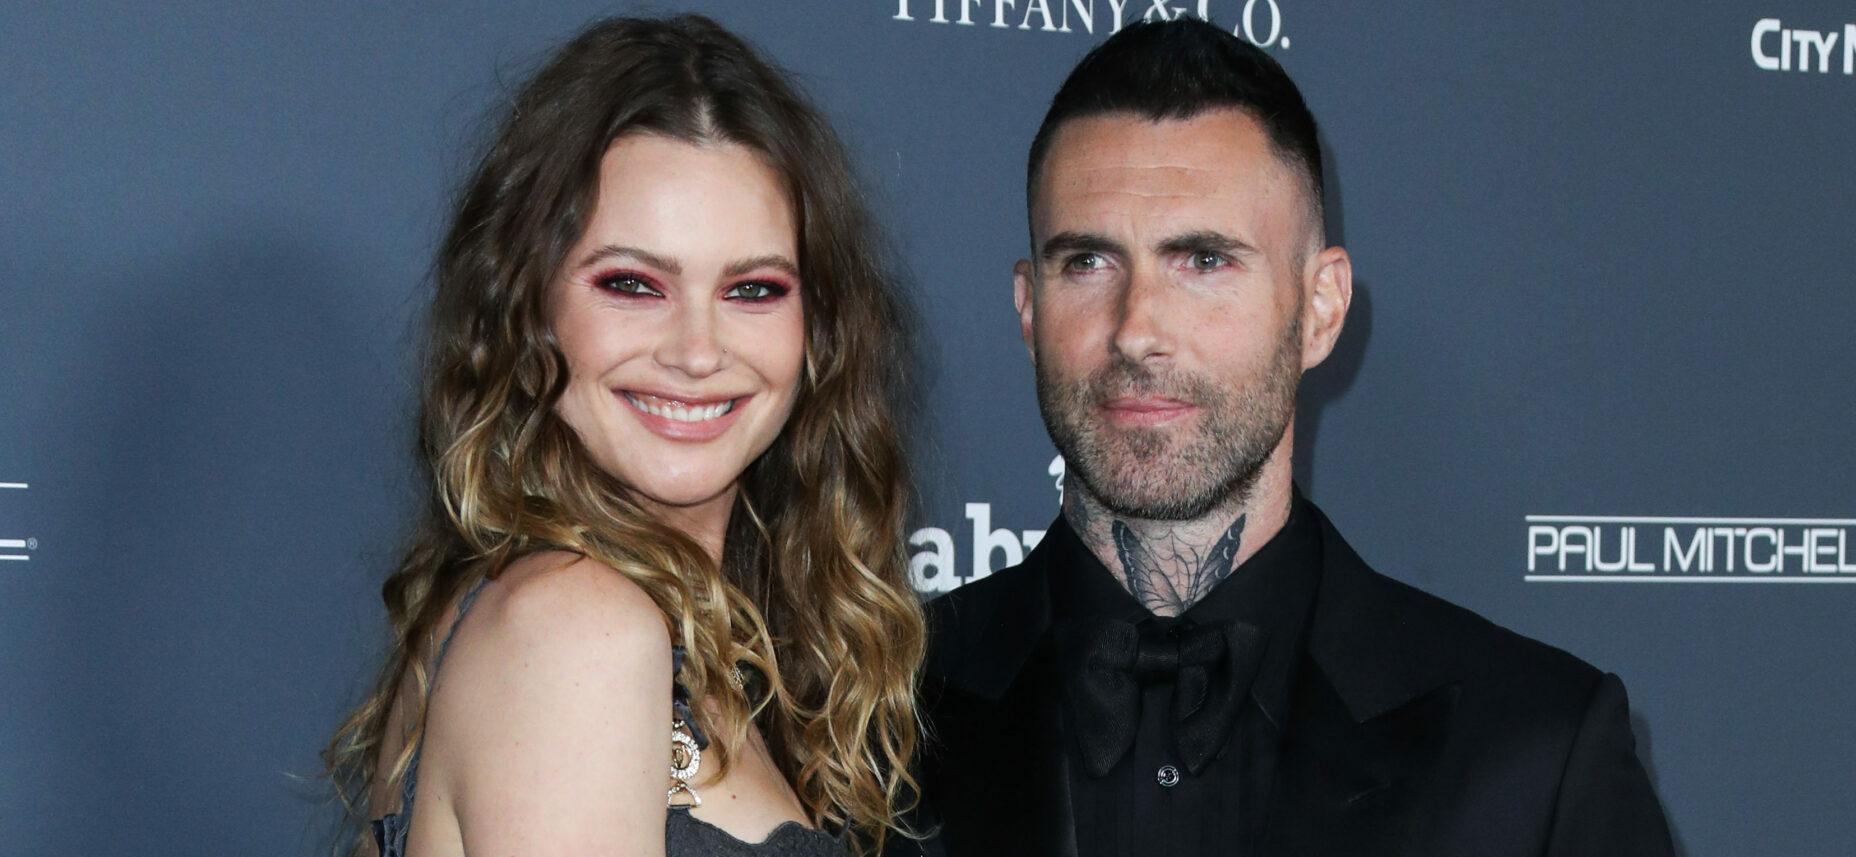 Adam Levine And Wife Behati Prinsloo Sued For Negligence & Premises Liability